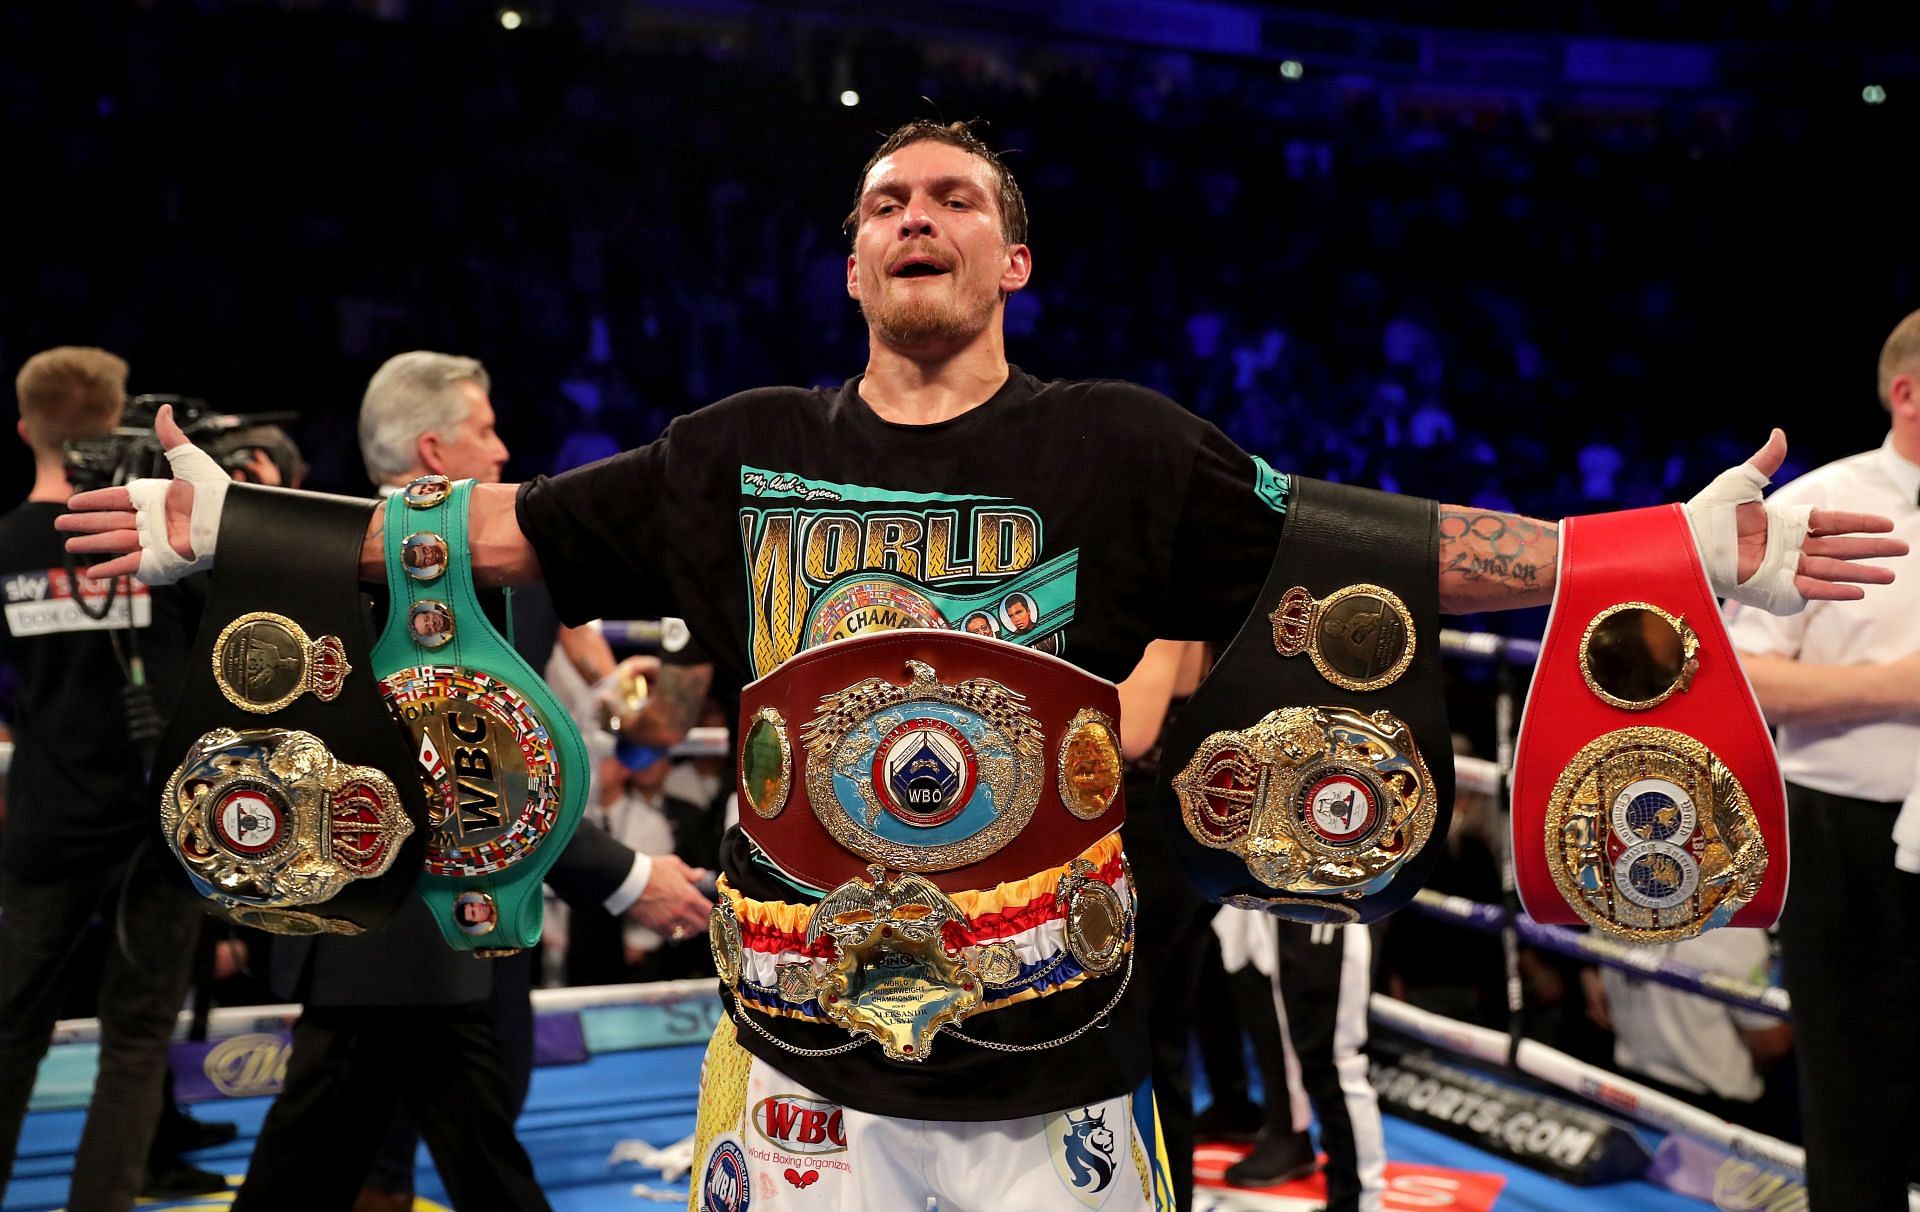 Oleksandr Usyk was once the Undisputed Cruiserweight Champion of the world